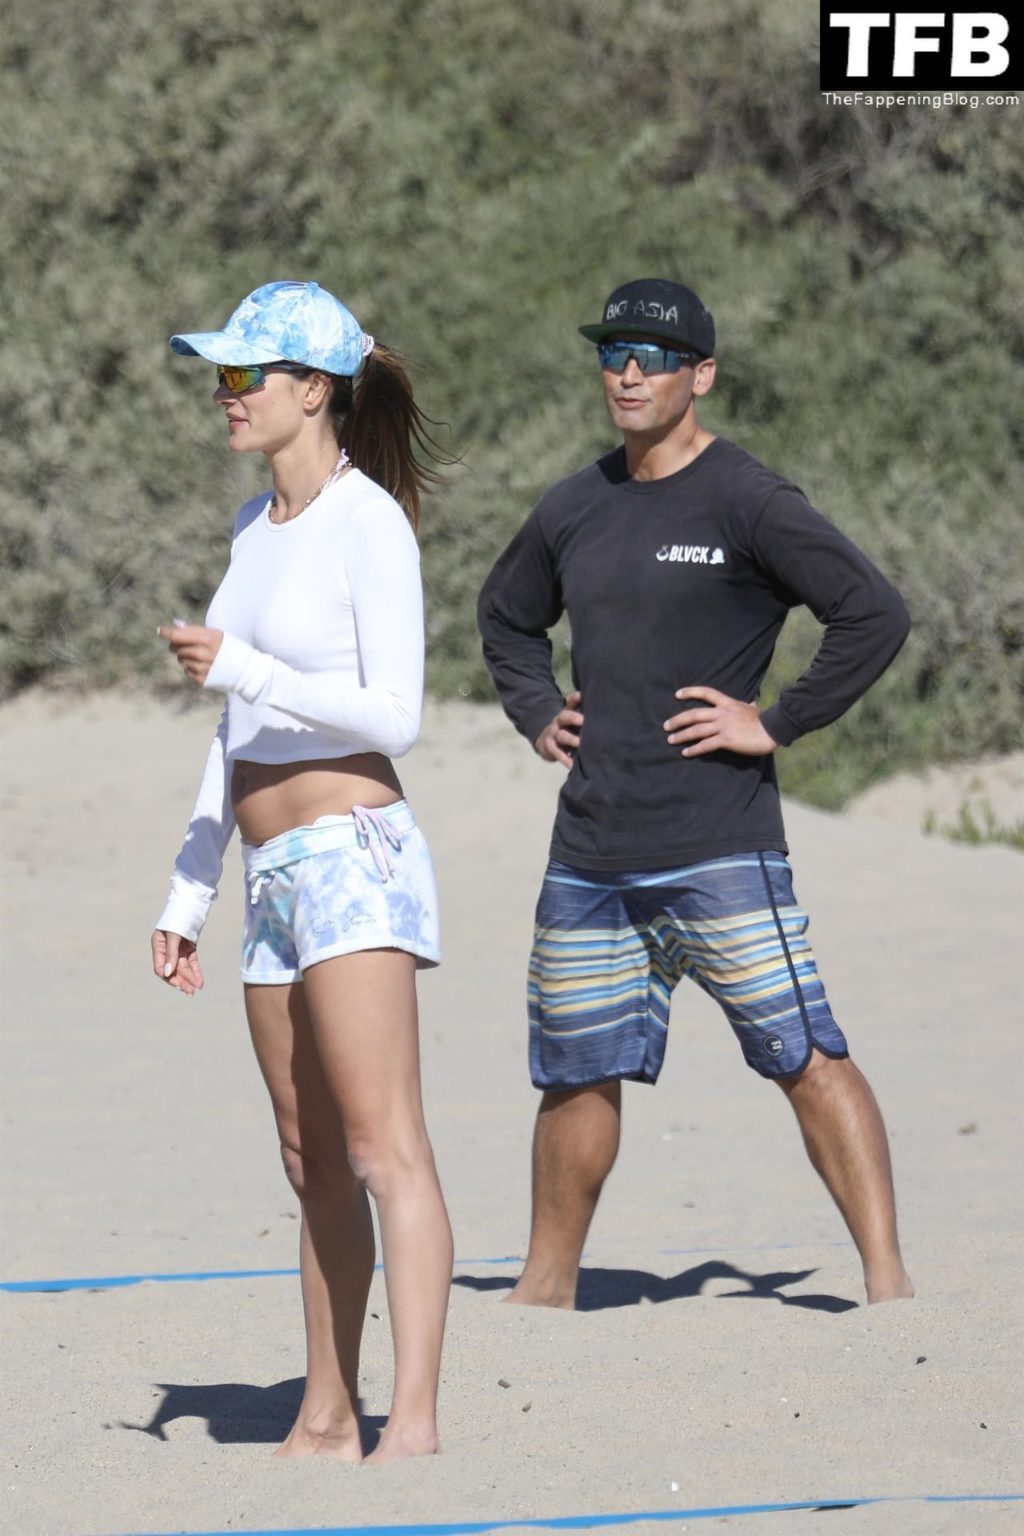 Alessandra Ambrosio Sexy The Fappening Blog 35 1 1024x1536 - Alessandra Ambrosio & Richard Lee Share Some PDA on the Beach During a Volleyball Match (114 Photos)